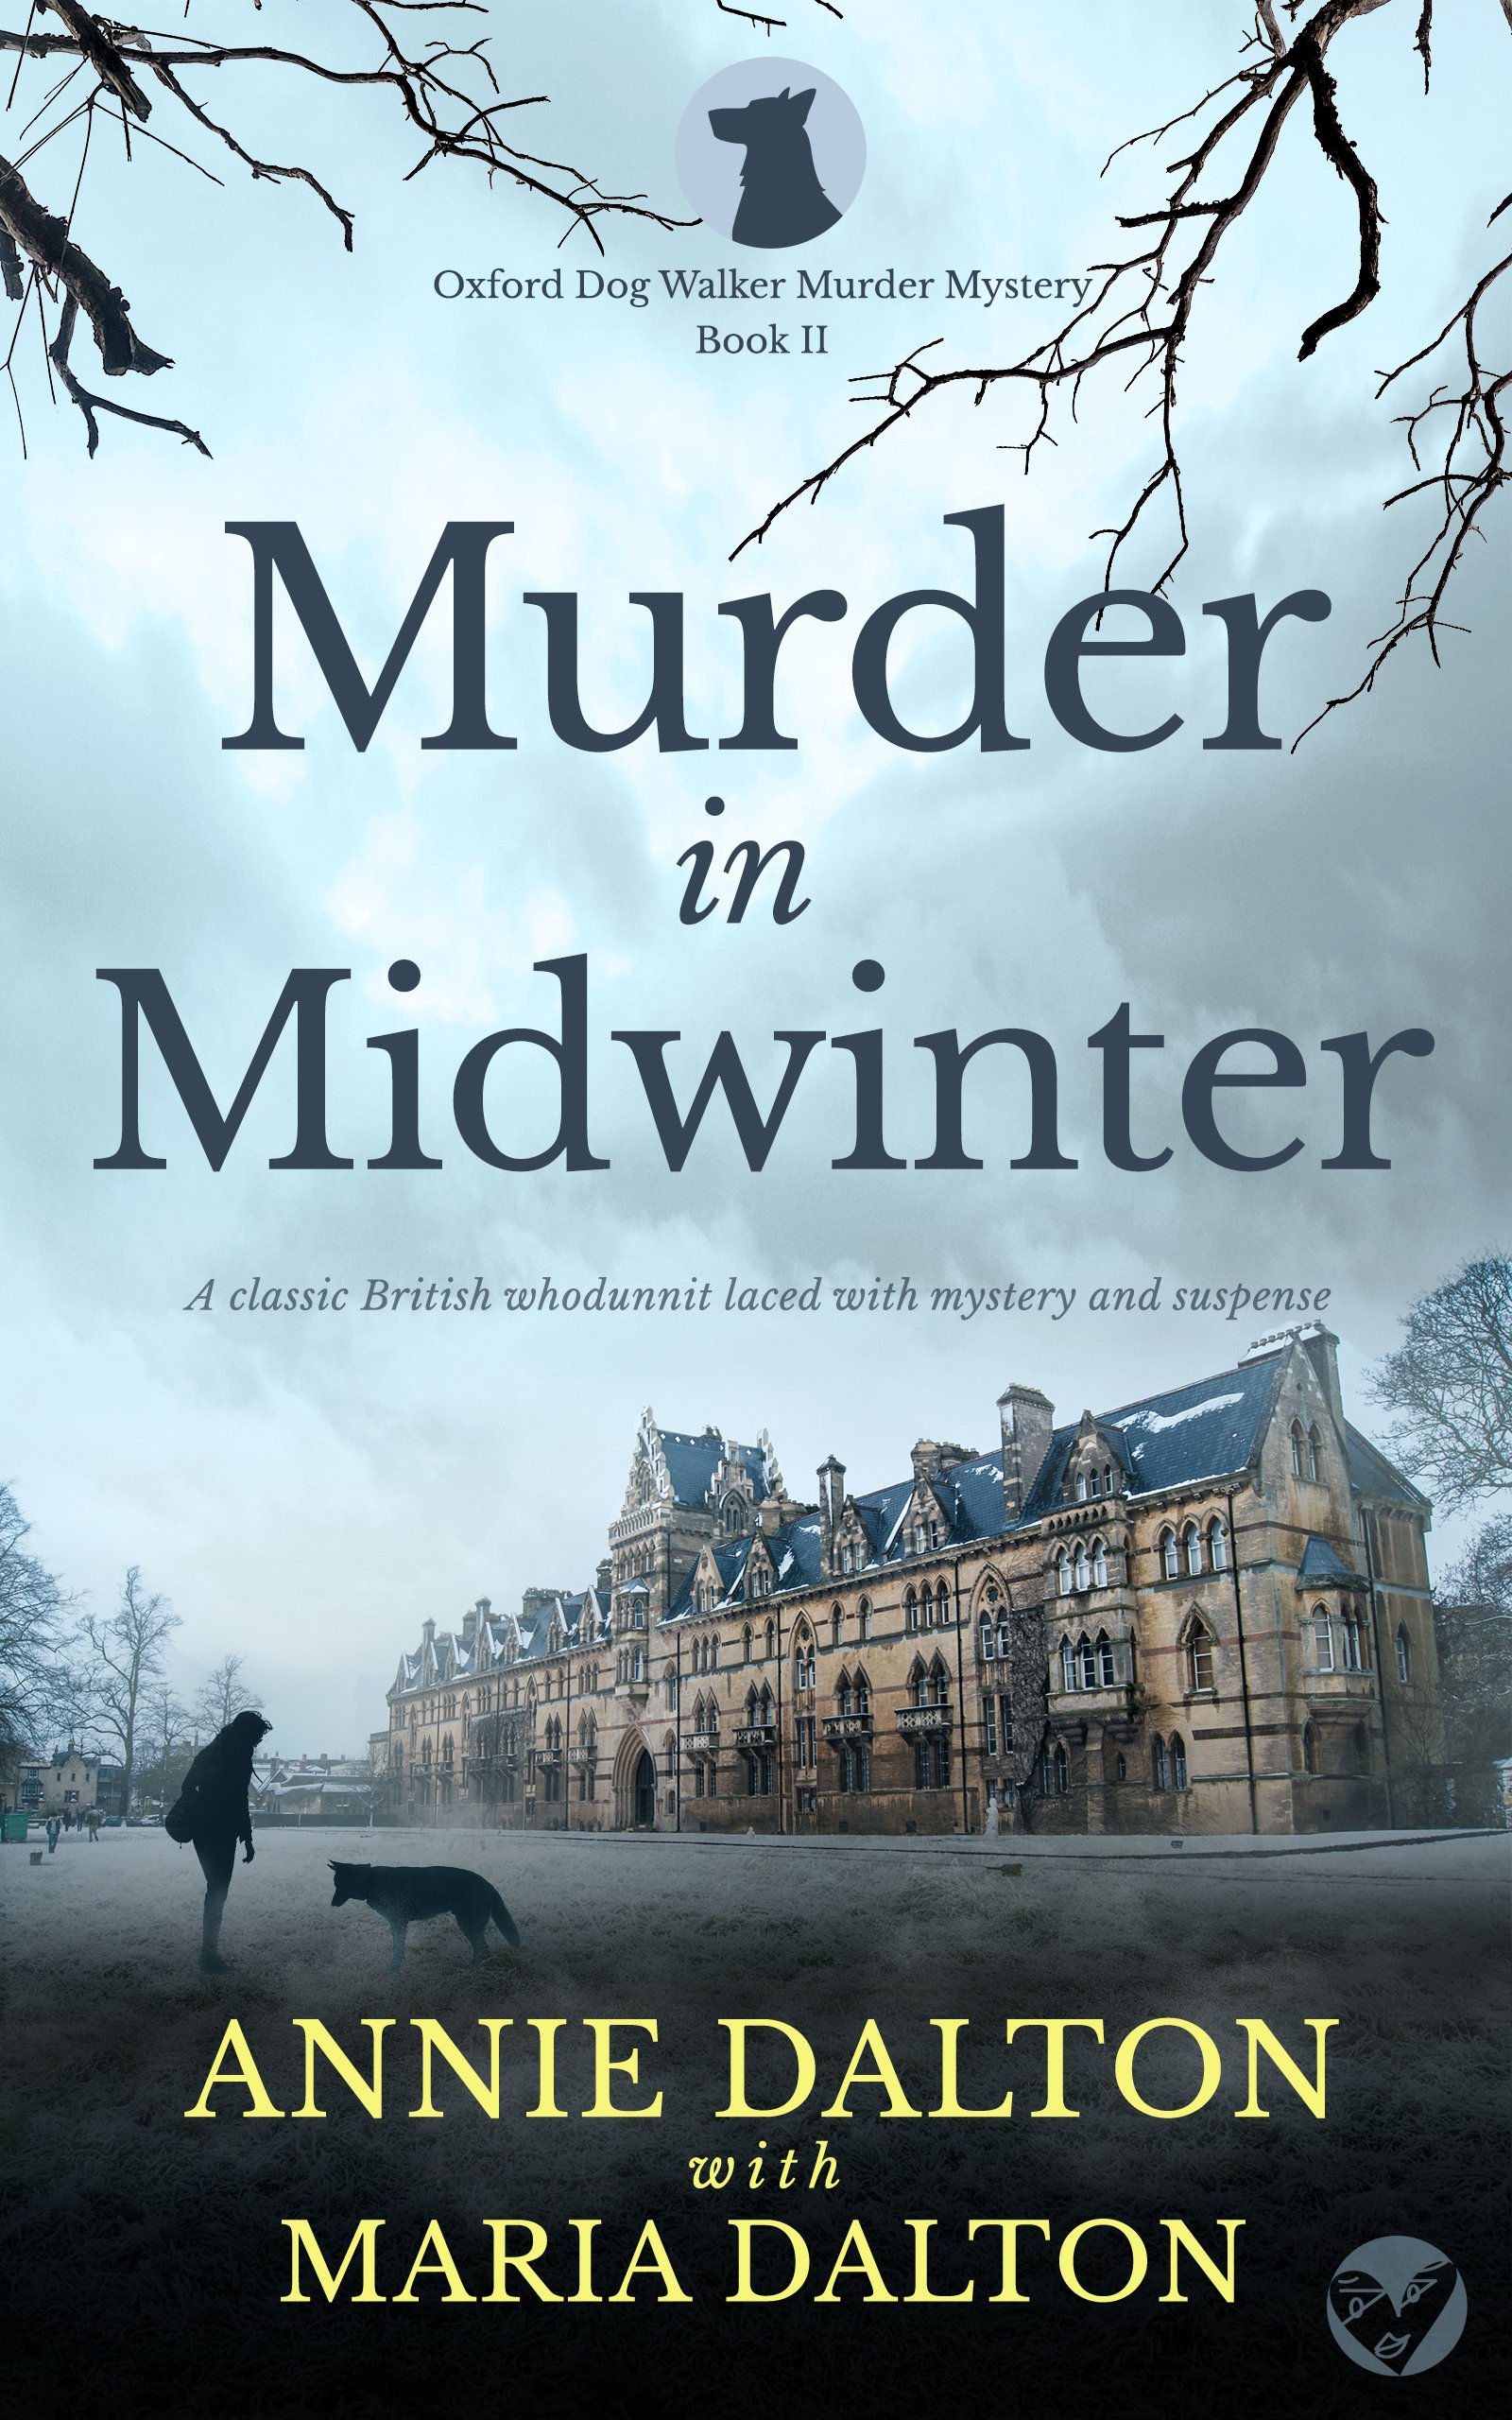 MURDER IN MIDWINTER Cover publish.jpg